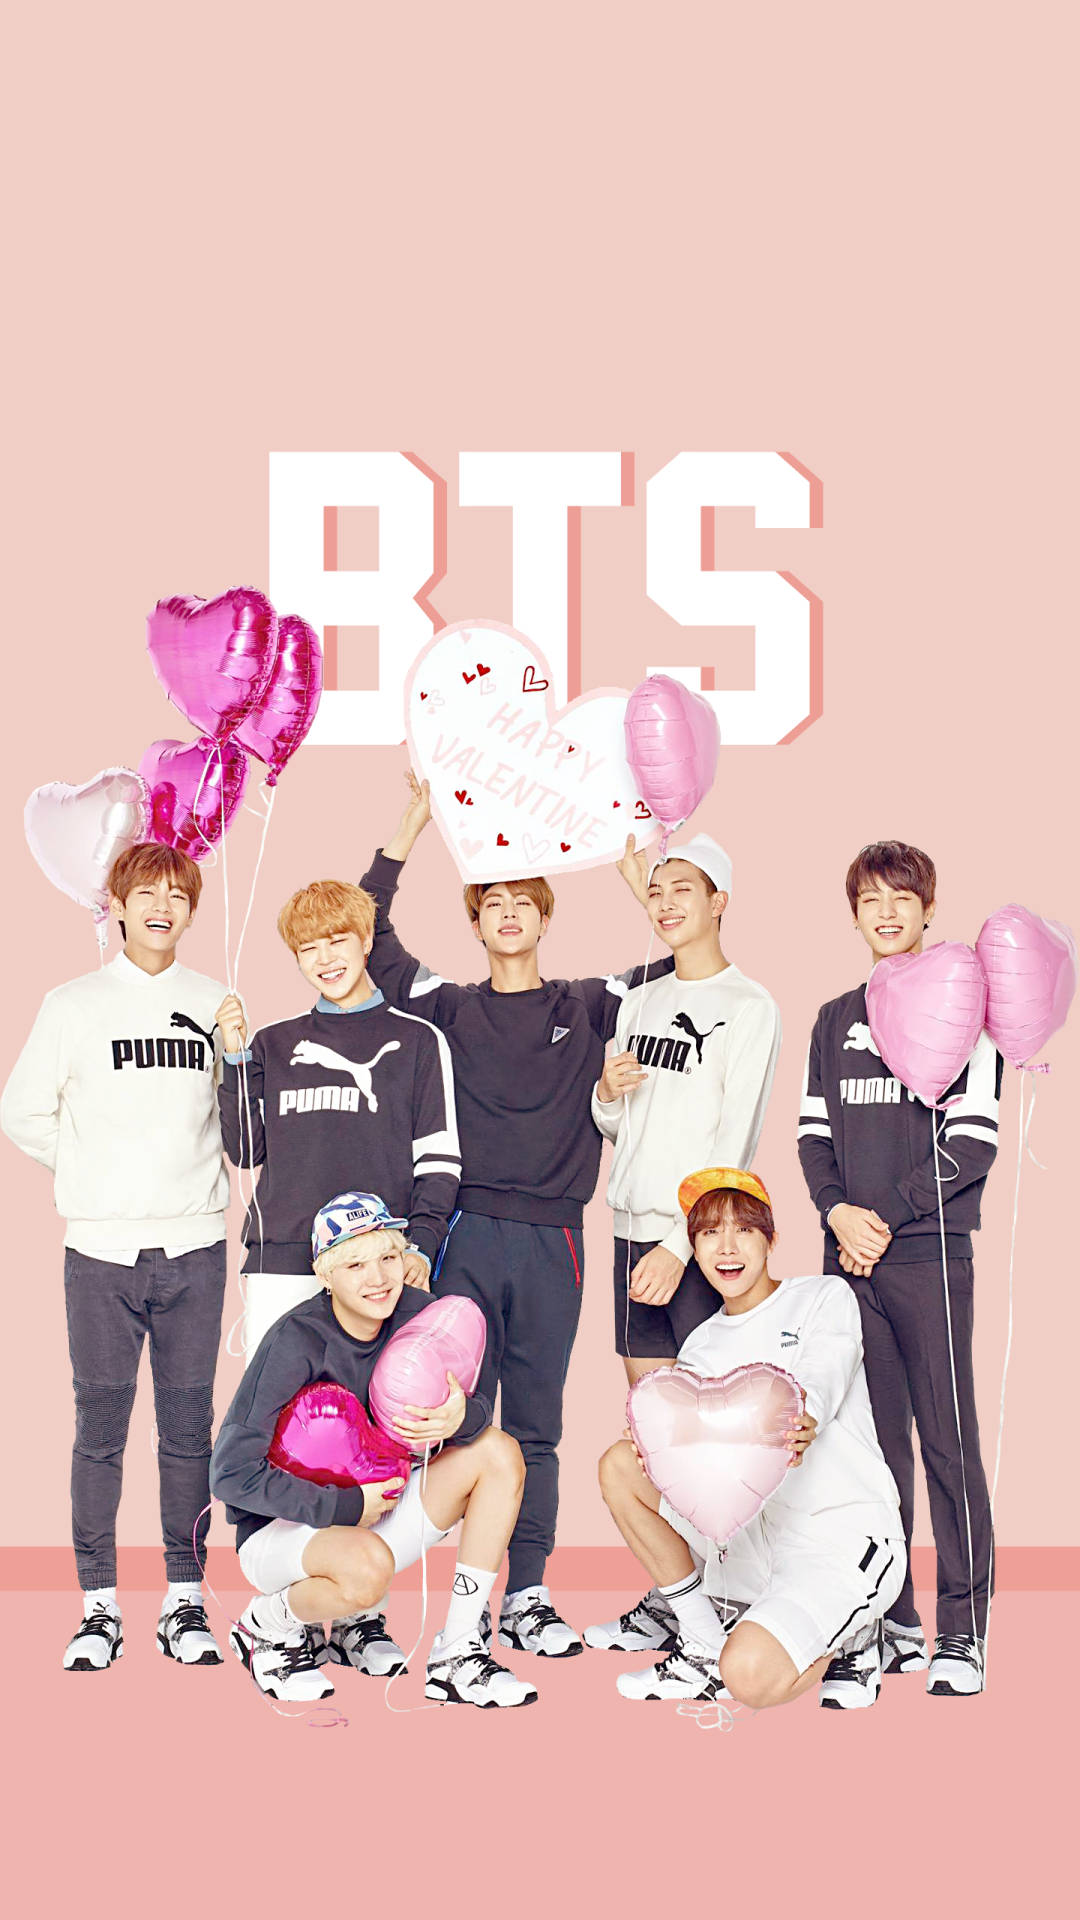 Bts Cartoon With Balloons Background